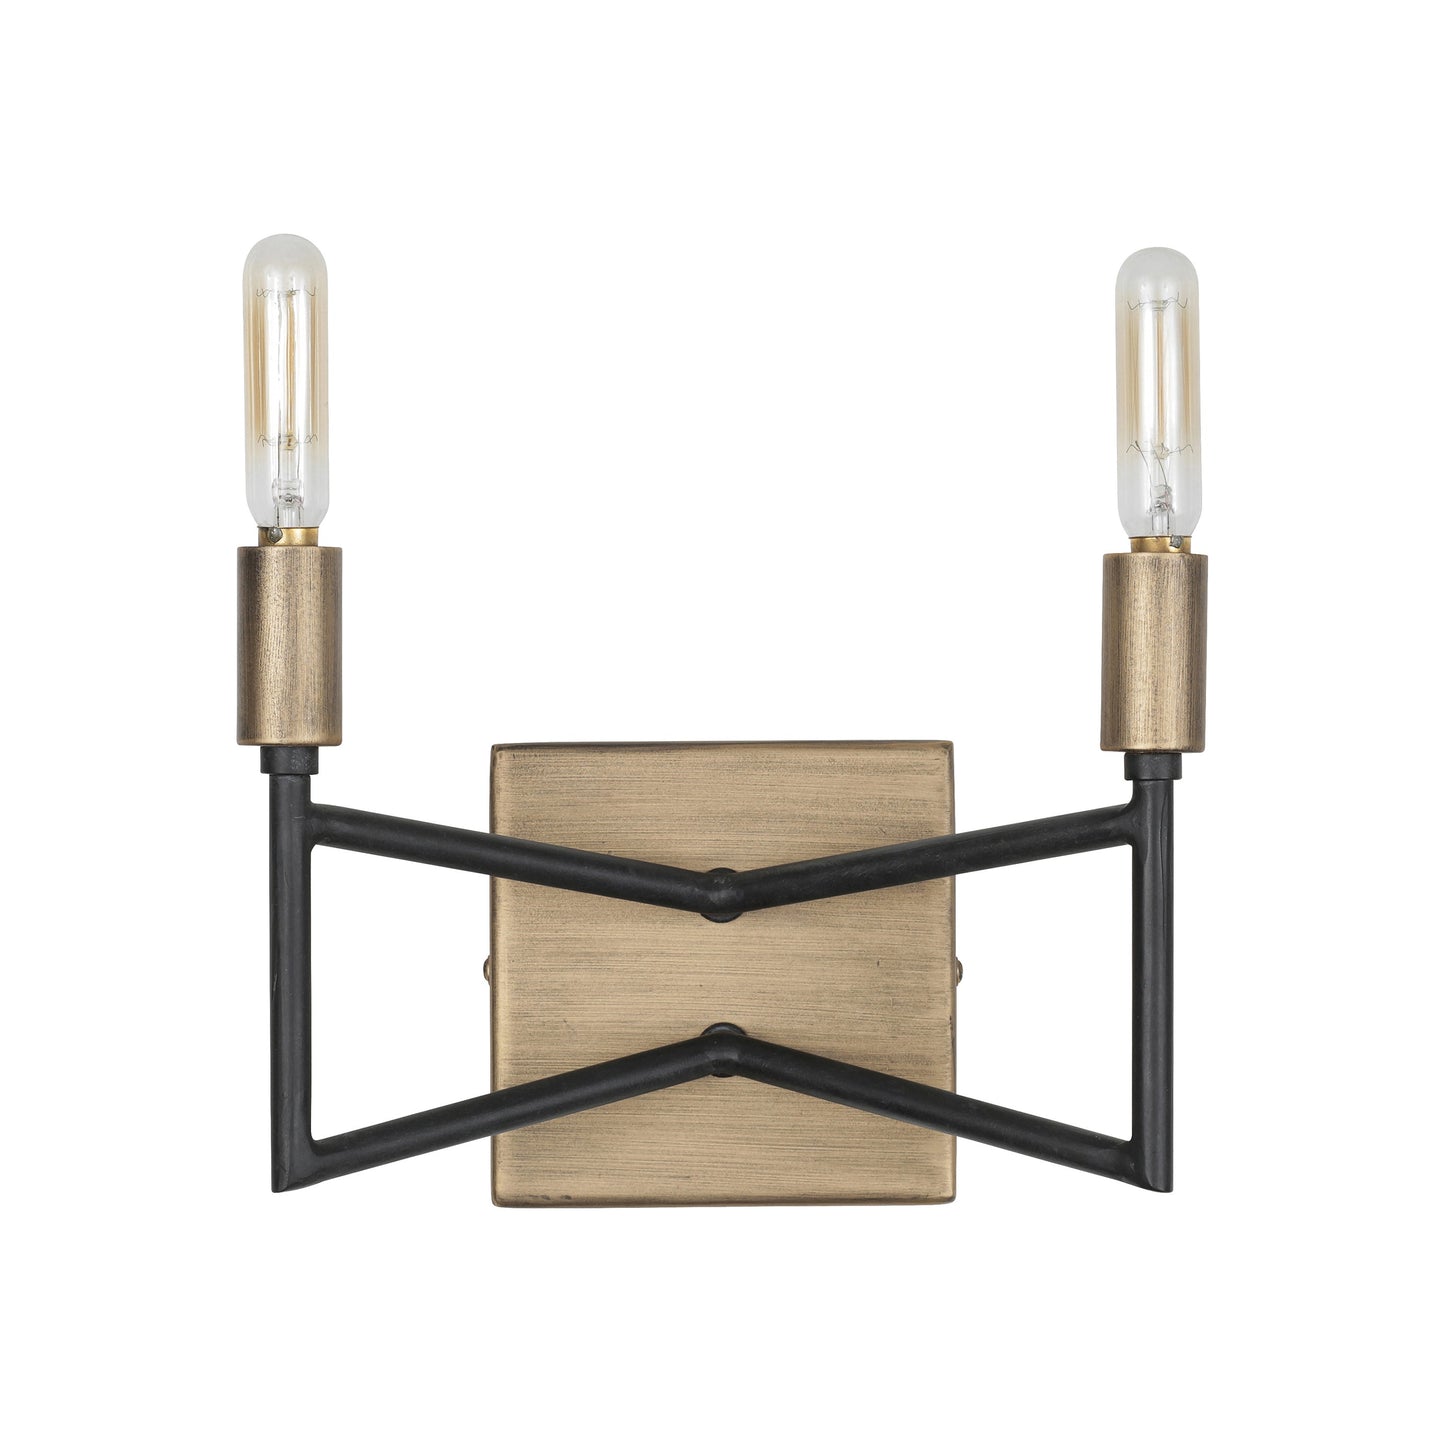 Bodie Wall Sconce